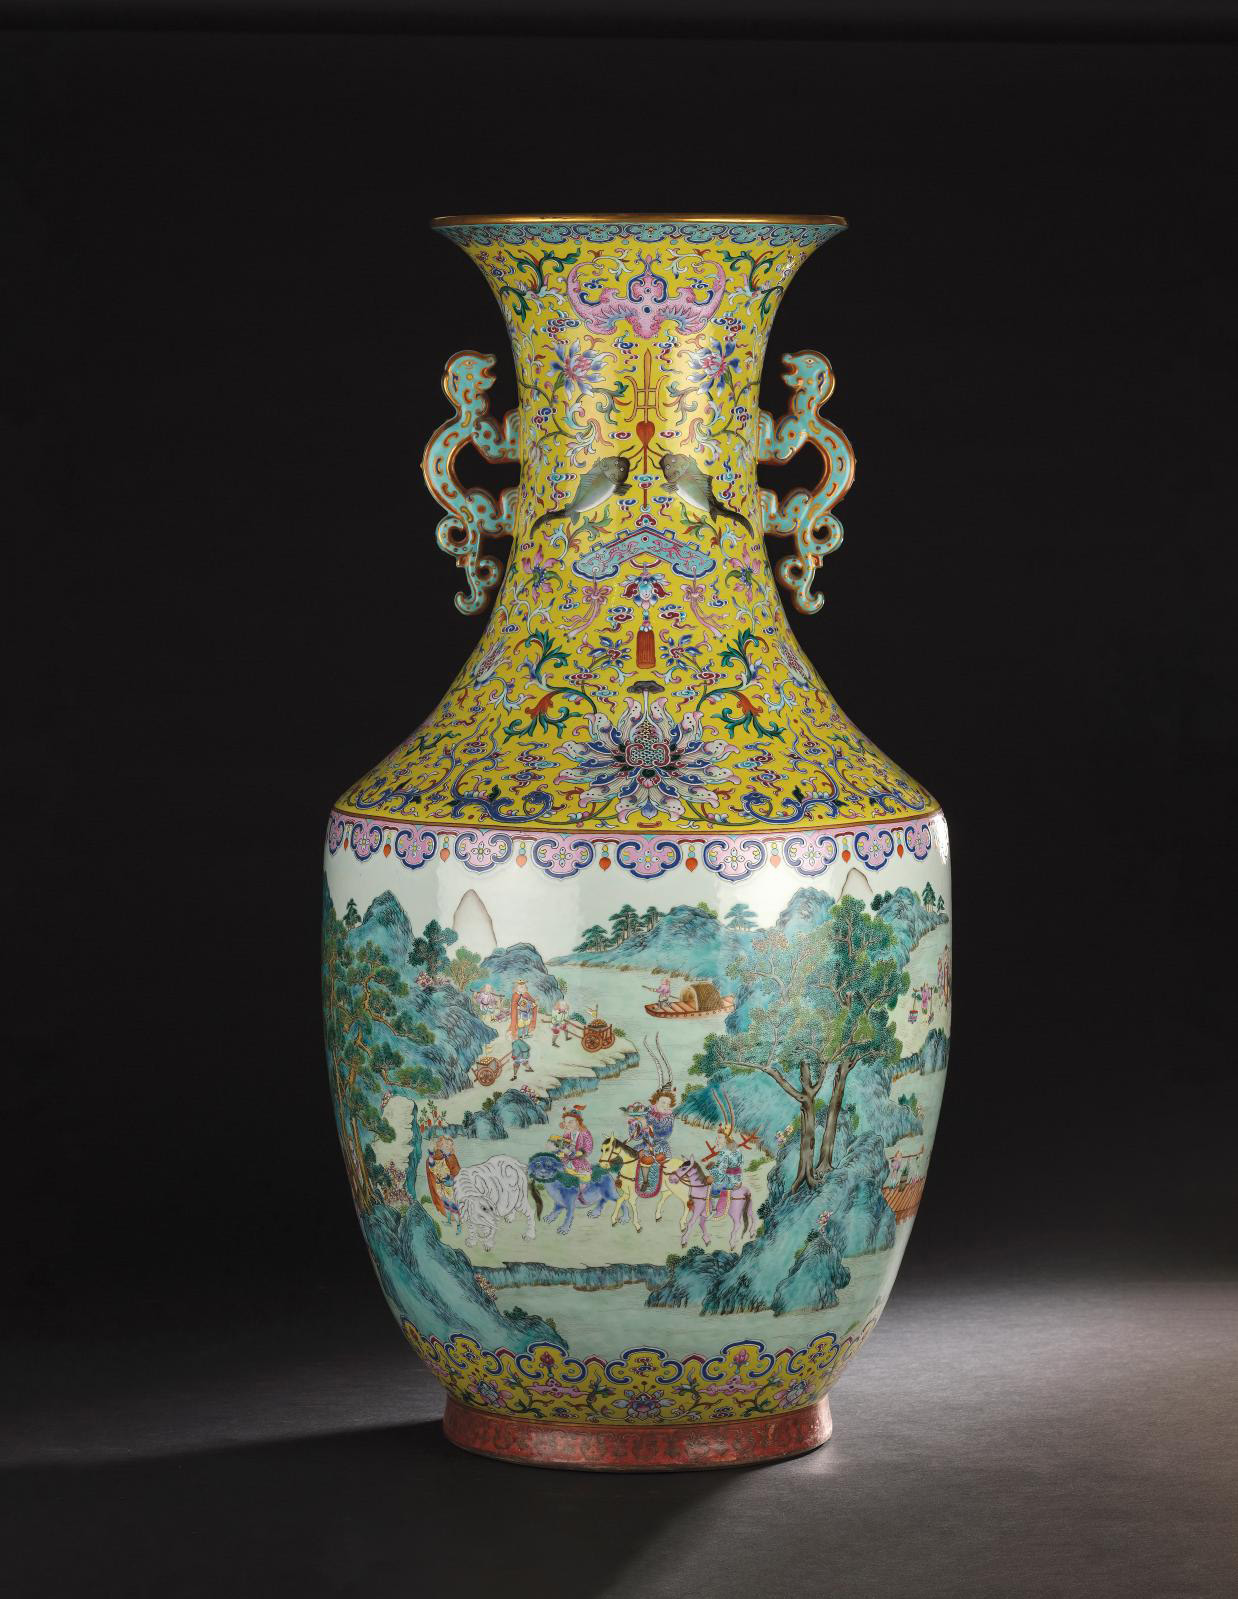 Jiaqing, Greuze and Gobert Vases: Treasures from a Château